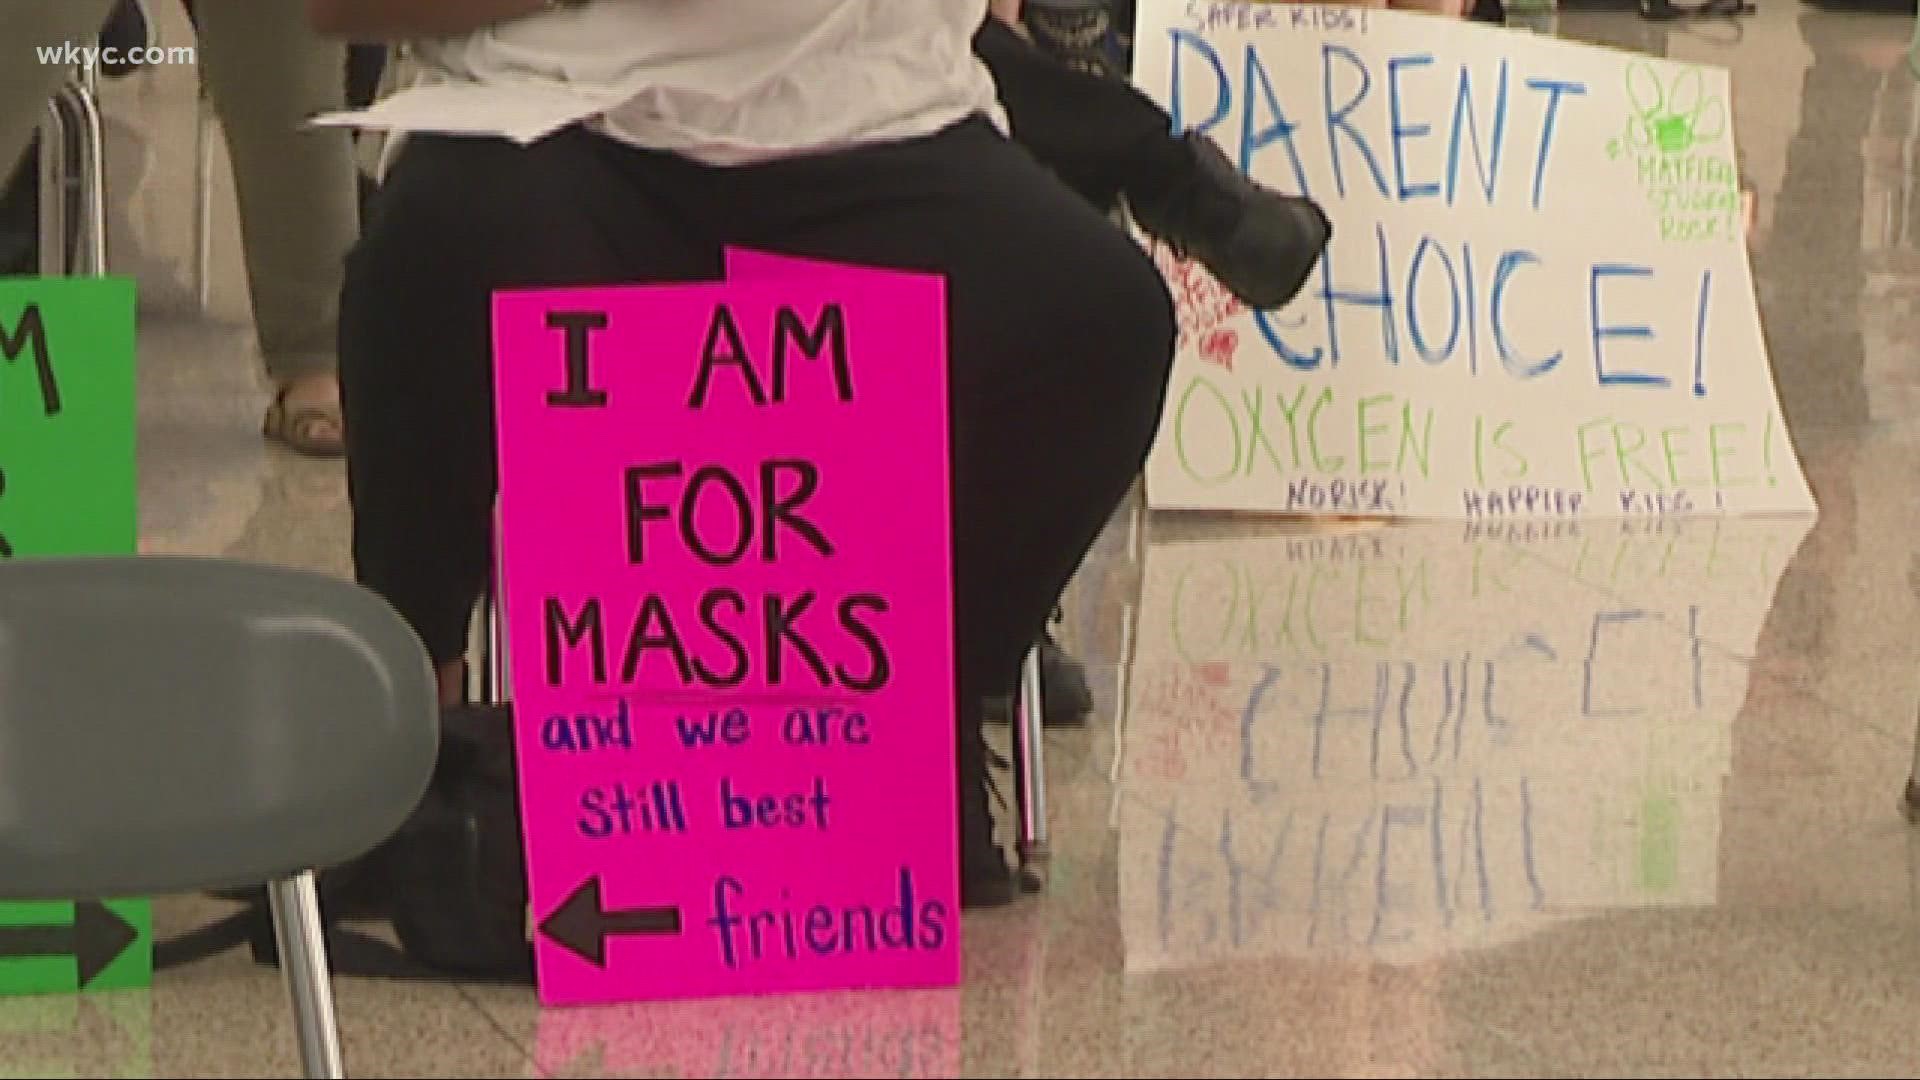 The chaotic scenes are becoming common around Northeast Ohio. Parents are erupting, upset on both sides of the mask debate.